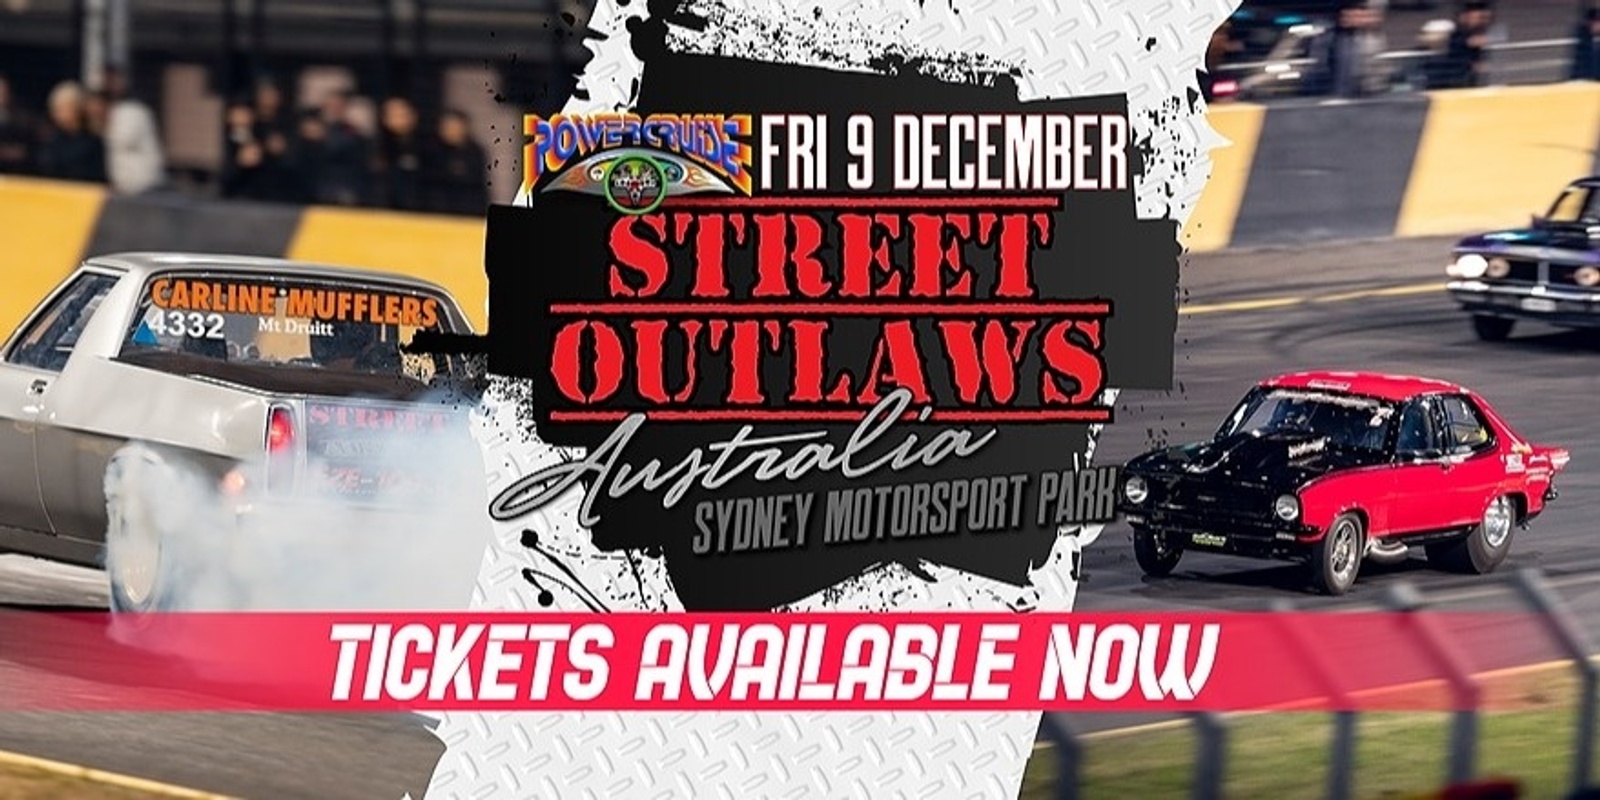 Street Outlaws Australia by Powercruise 9th December 2022, Sydney NSW